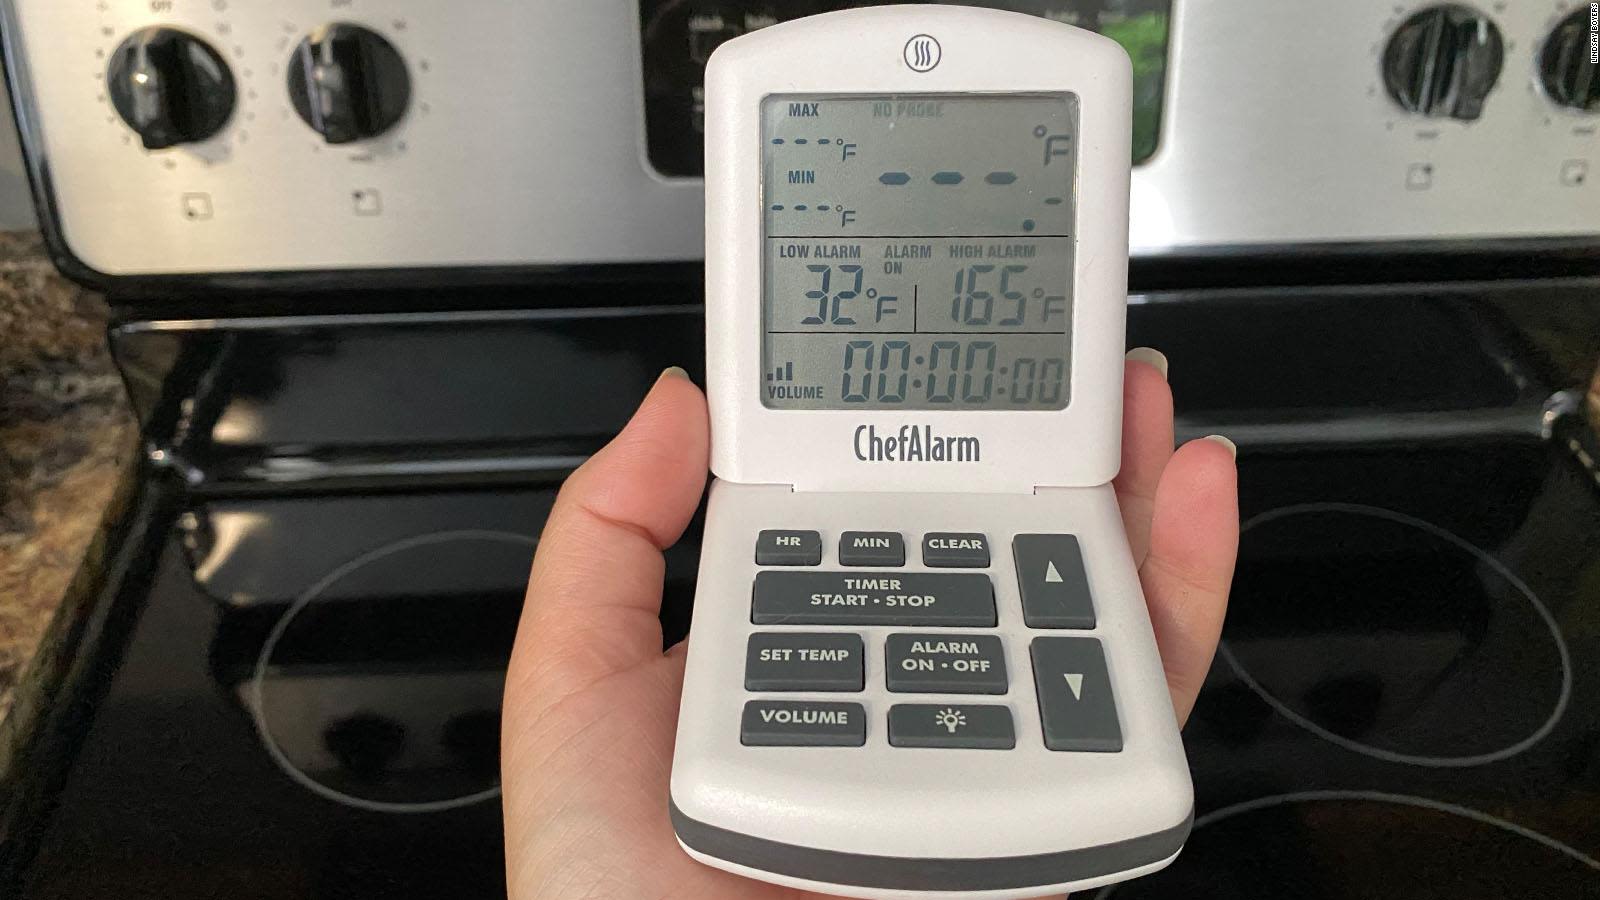 https://media.cnn.com/api/v1/images/stellar/prod/underscored-best-tested-products-meat-thermometer-thermoworks-chef-alarm-lifestyle-shot.jpeg?q=h_900,w_1600,x_0,y_0